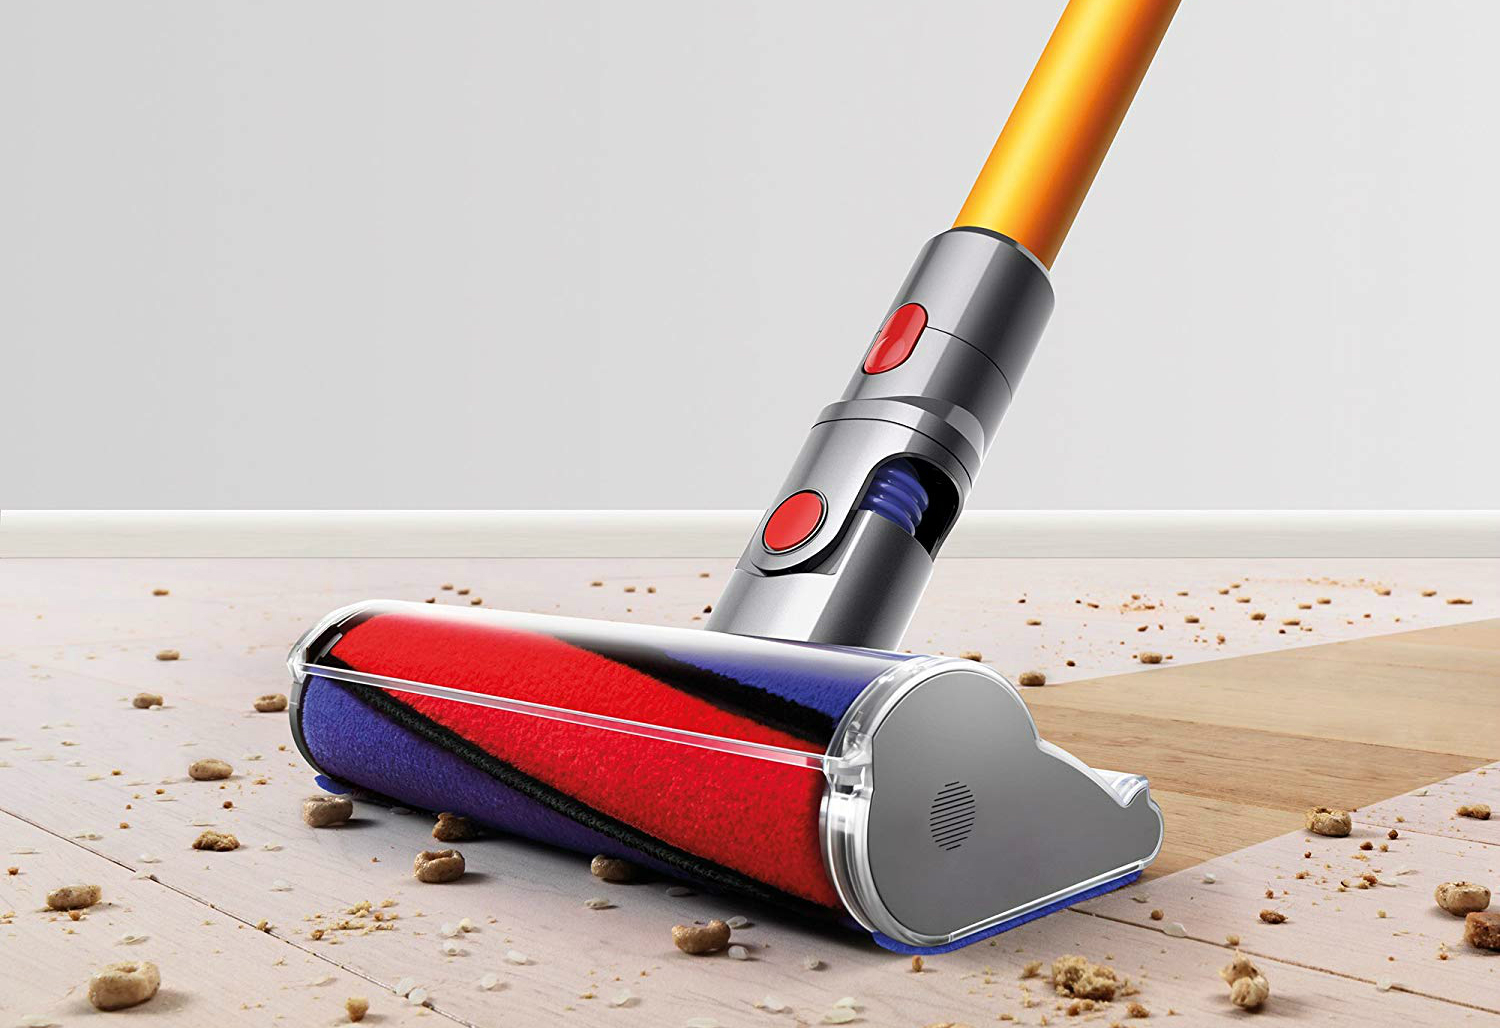 dyson vacuum cleaner deals on amazon v8 absolute cordless stick yellow